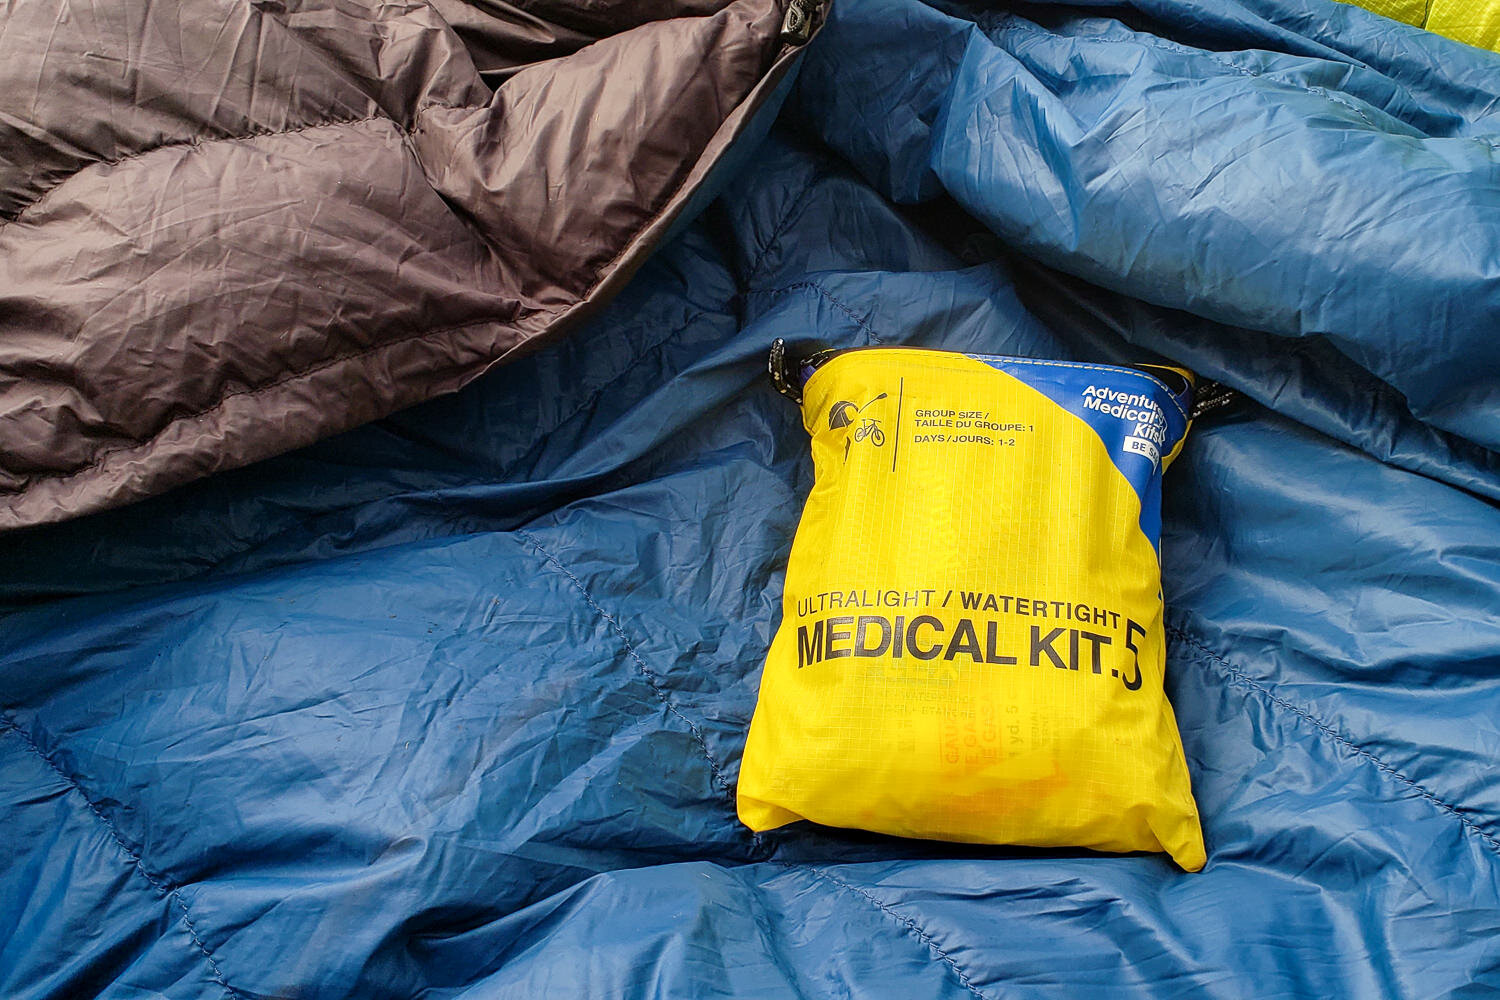 It’s always a good idea to carry a small, lightweight first aid kit like the .5 Adventure Medical Kit.